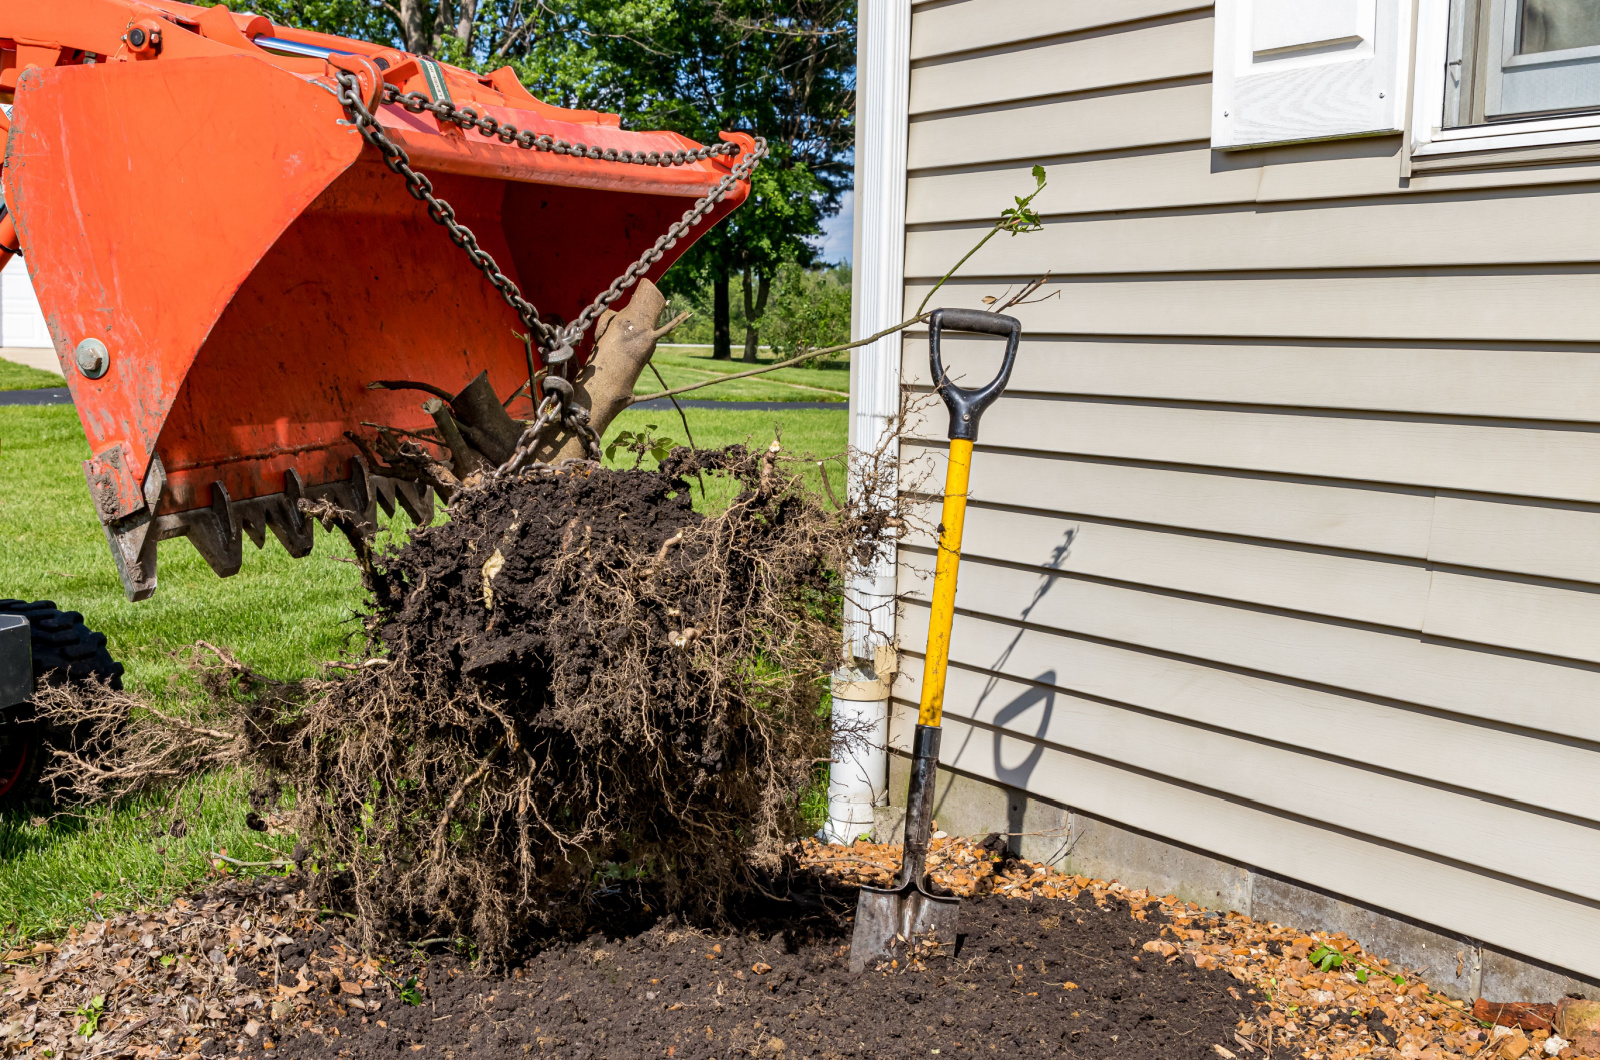 Tractor pulling root ball of bush or shrub out of ground